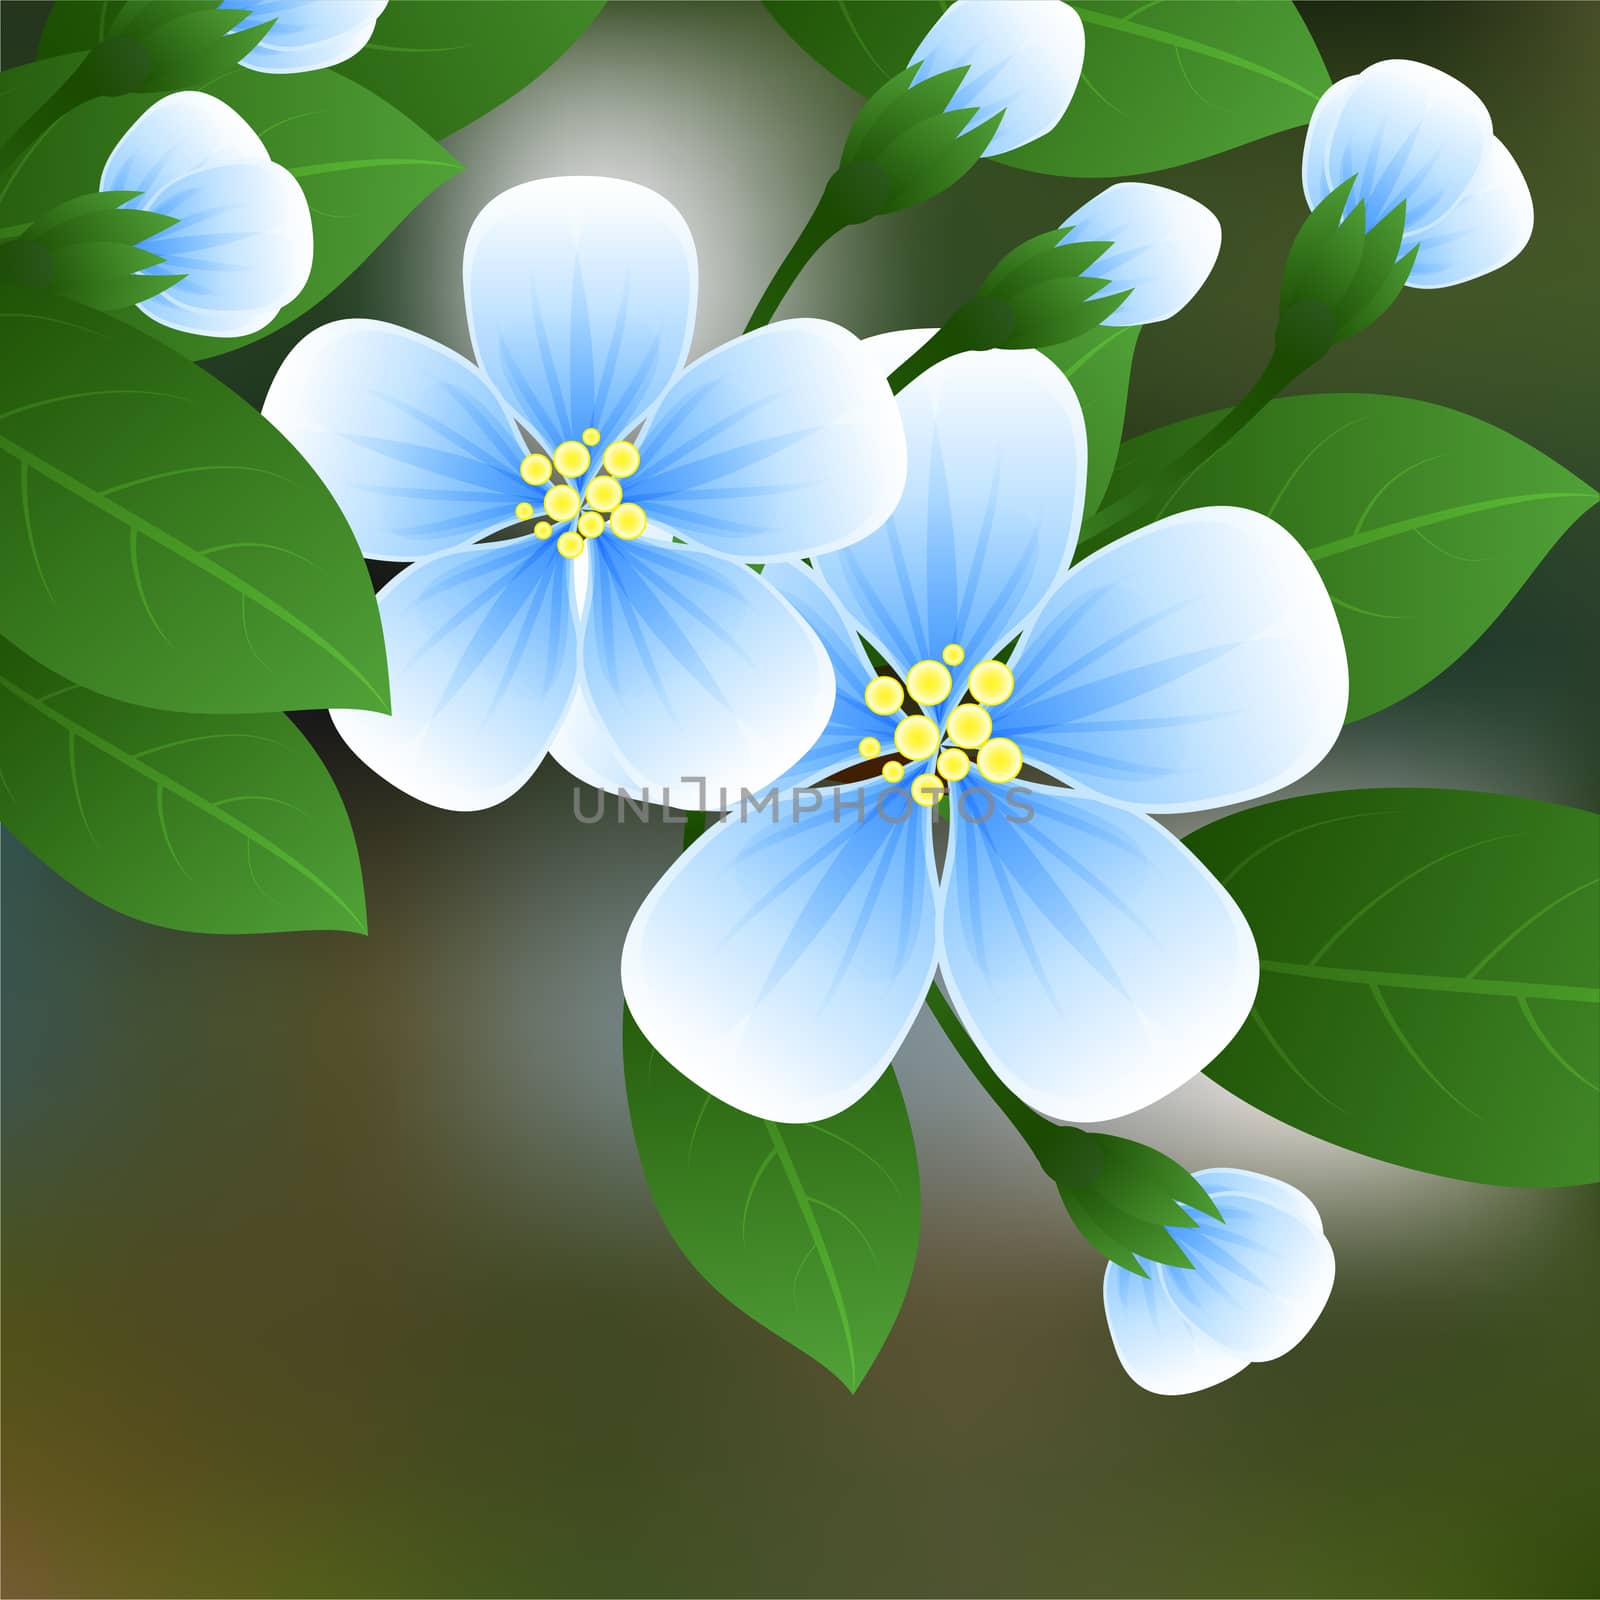 Flowering cherry. Blue flowers on a branch with green leaves and place for text. illustration